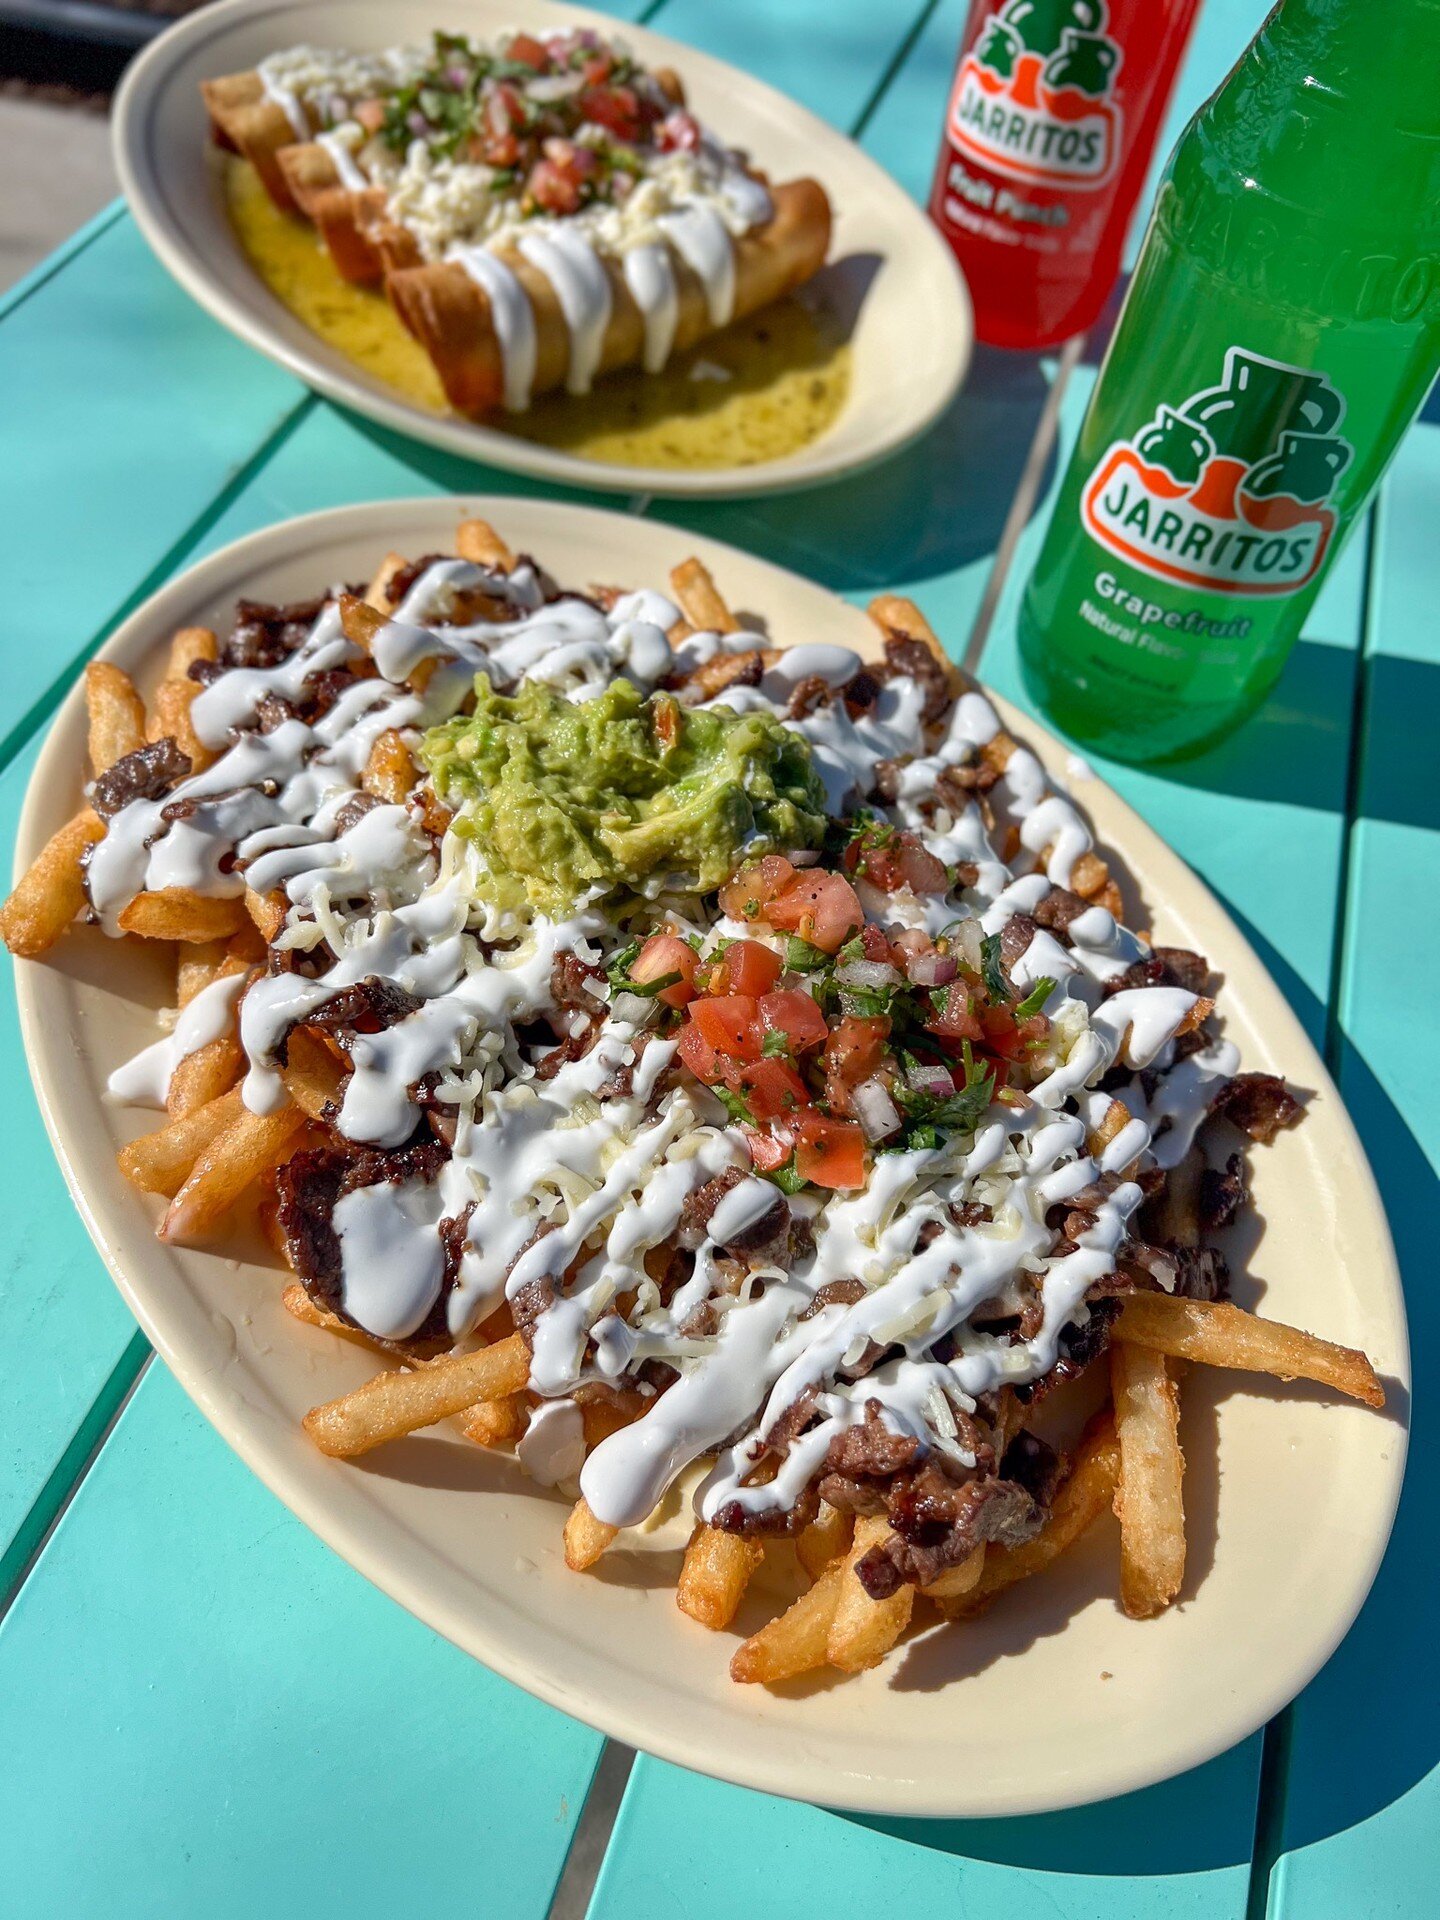 Let your taste buds enter fry heaven! 🍟😇

#oraletacobar #taqueria #southernpines #mexicanfood #comidamexicana #southernpinesfood #southernpinesnc